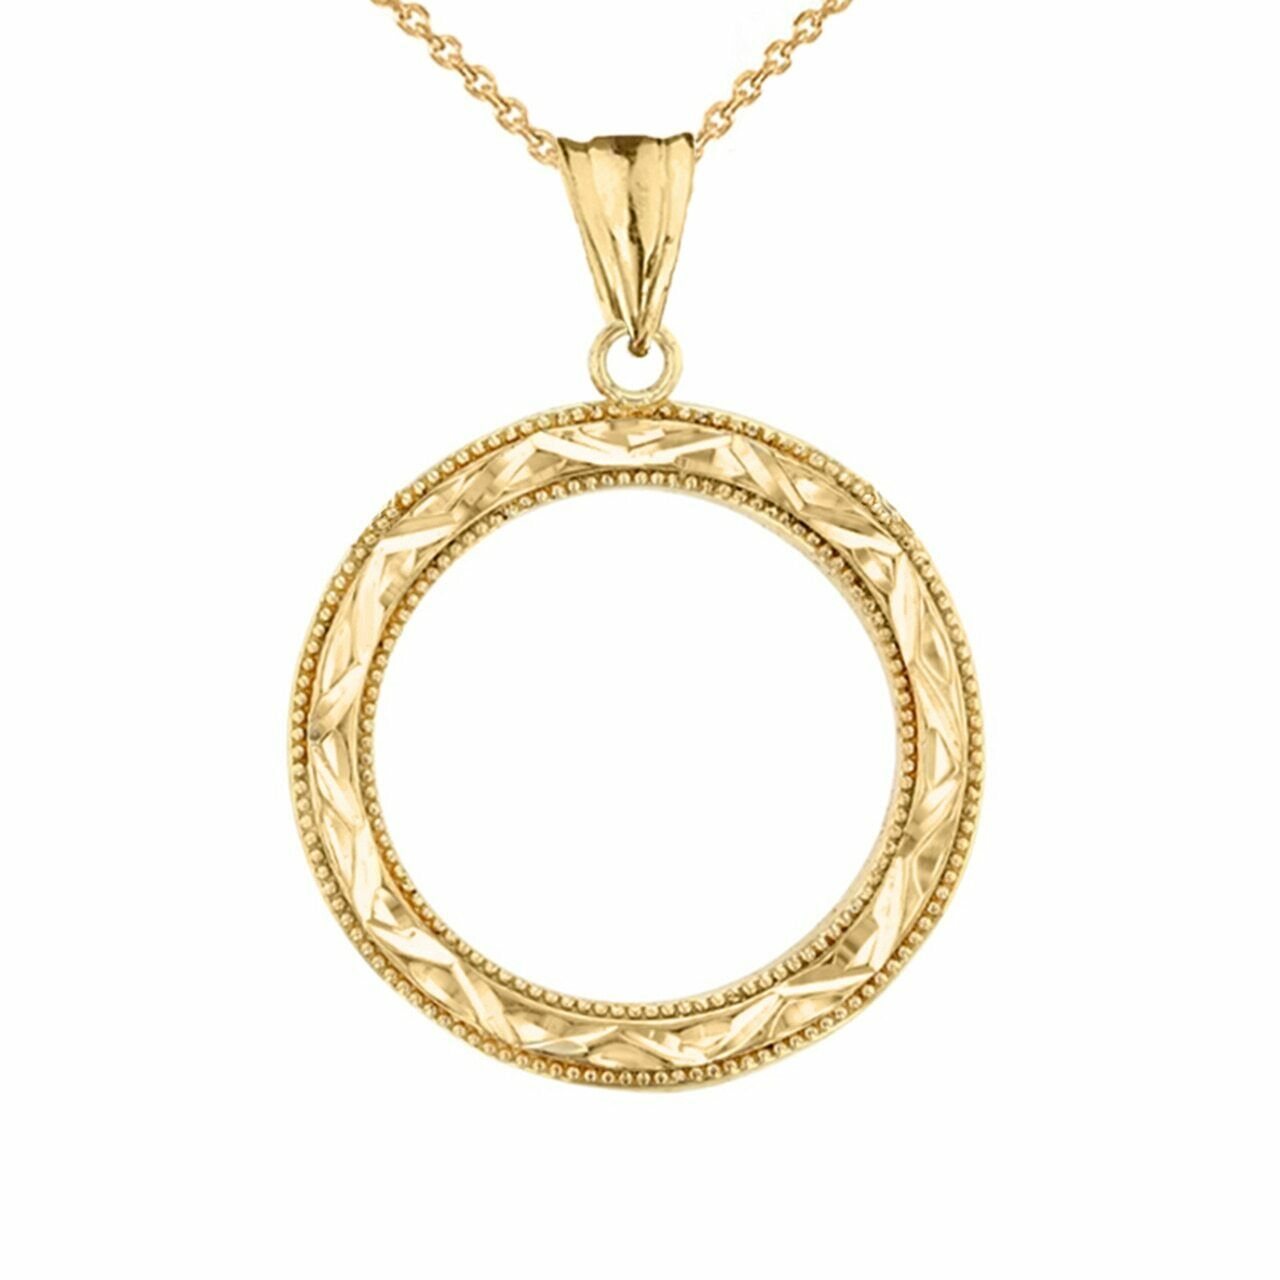 Solid 14k In Yellow Gold Chic Sparkle Cut Circle Of Life Pendant Necklace